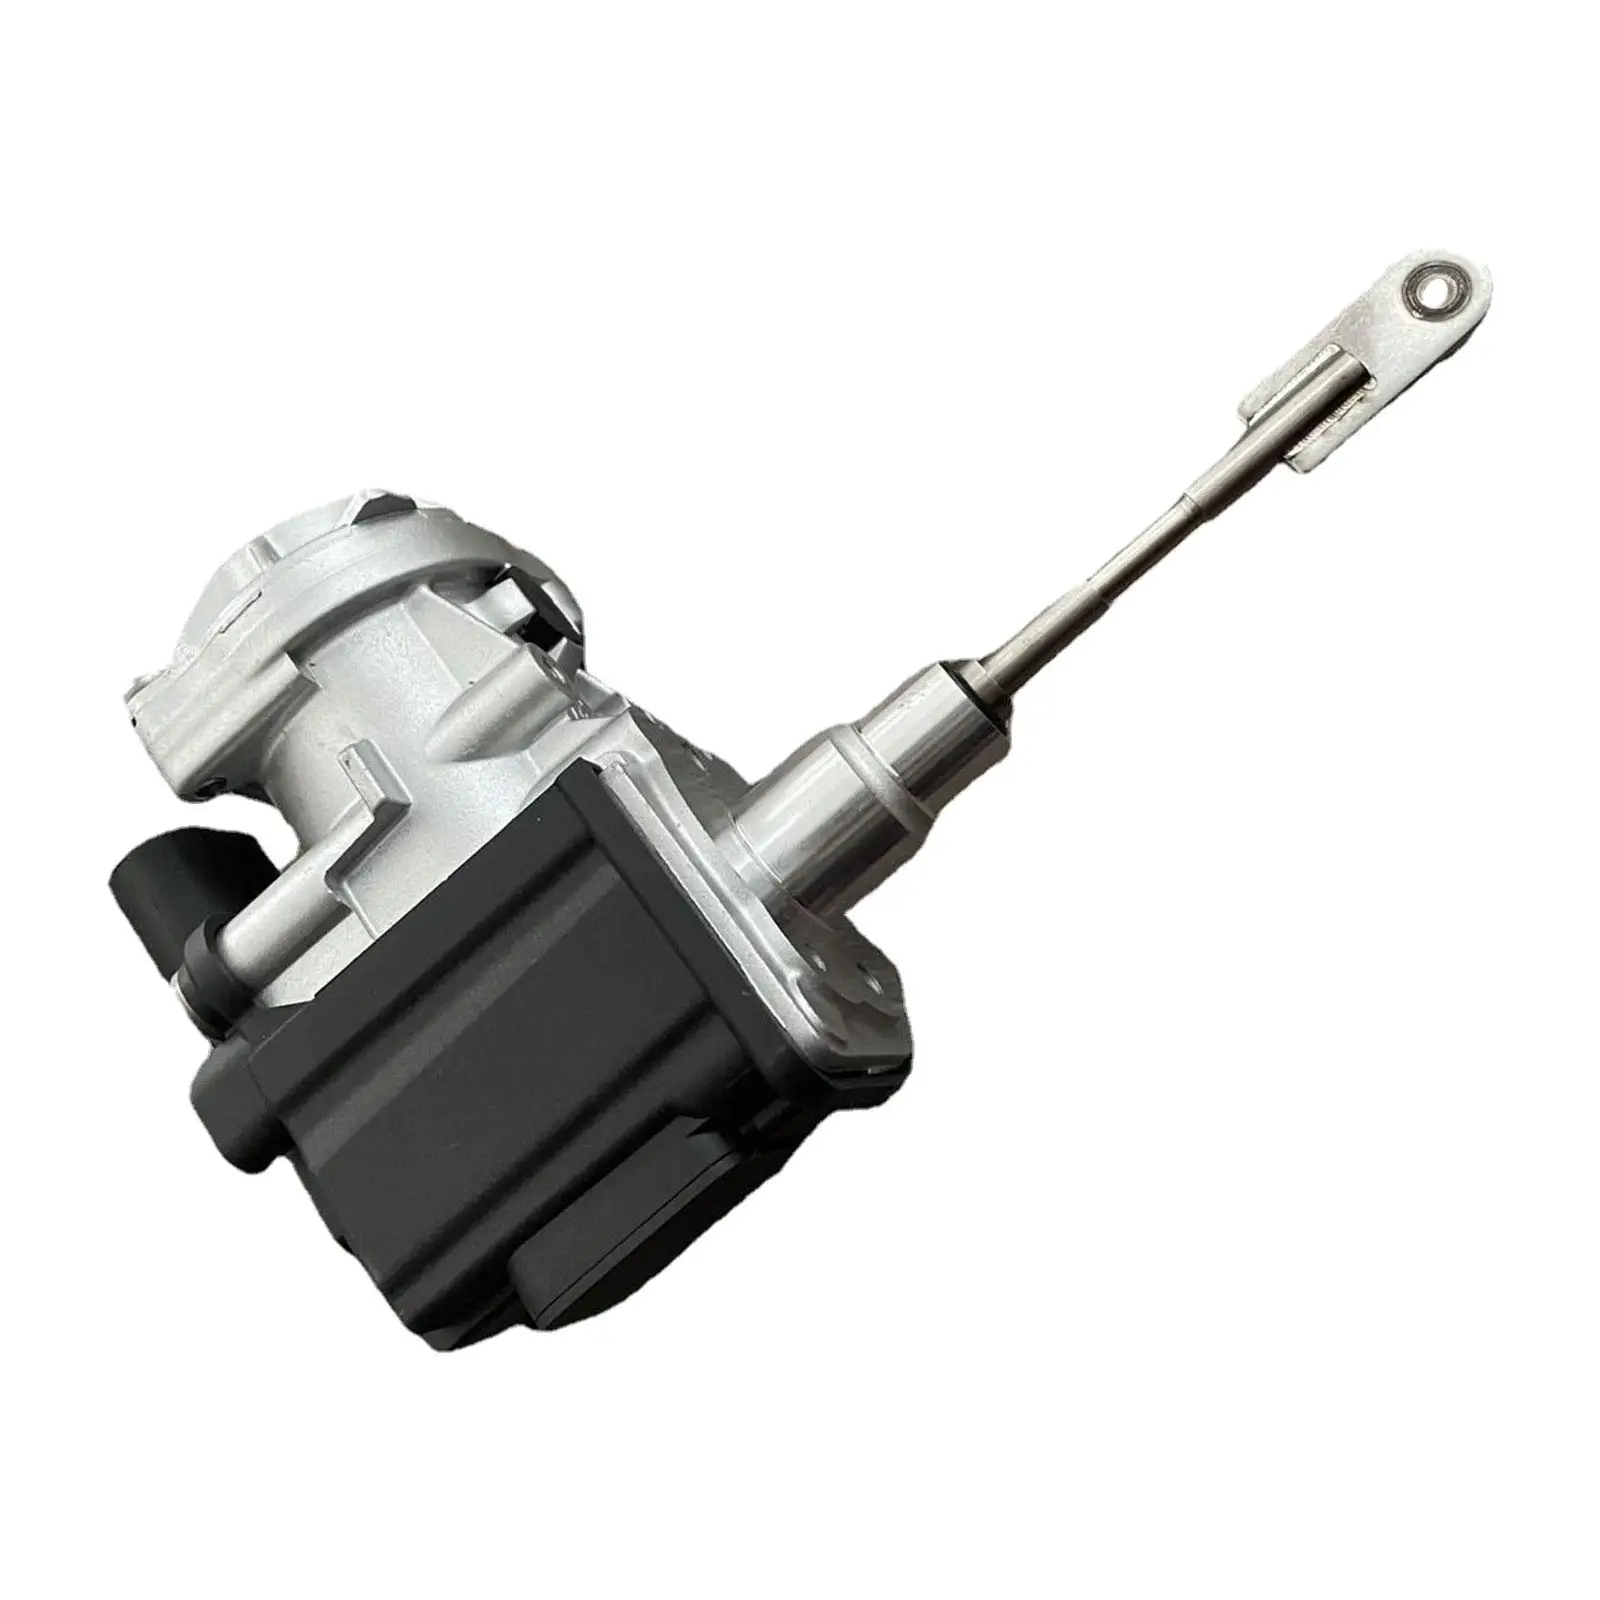 04E14525Ab Easy to Use Premium Replacement High performance Spare Parts Metal Turbo Actuator for Volkswagen